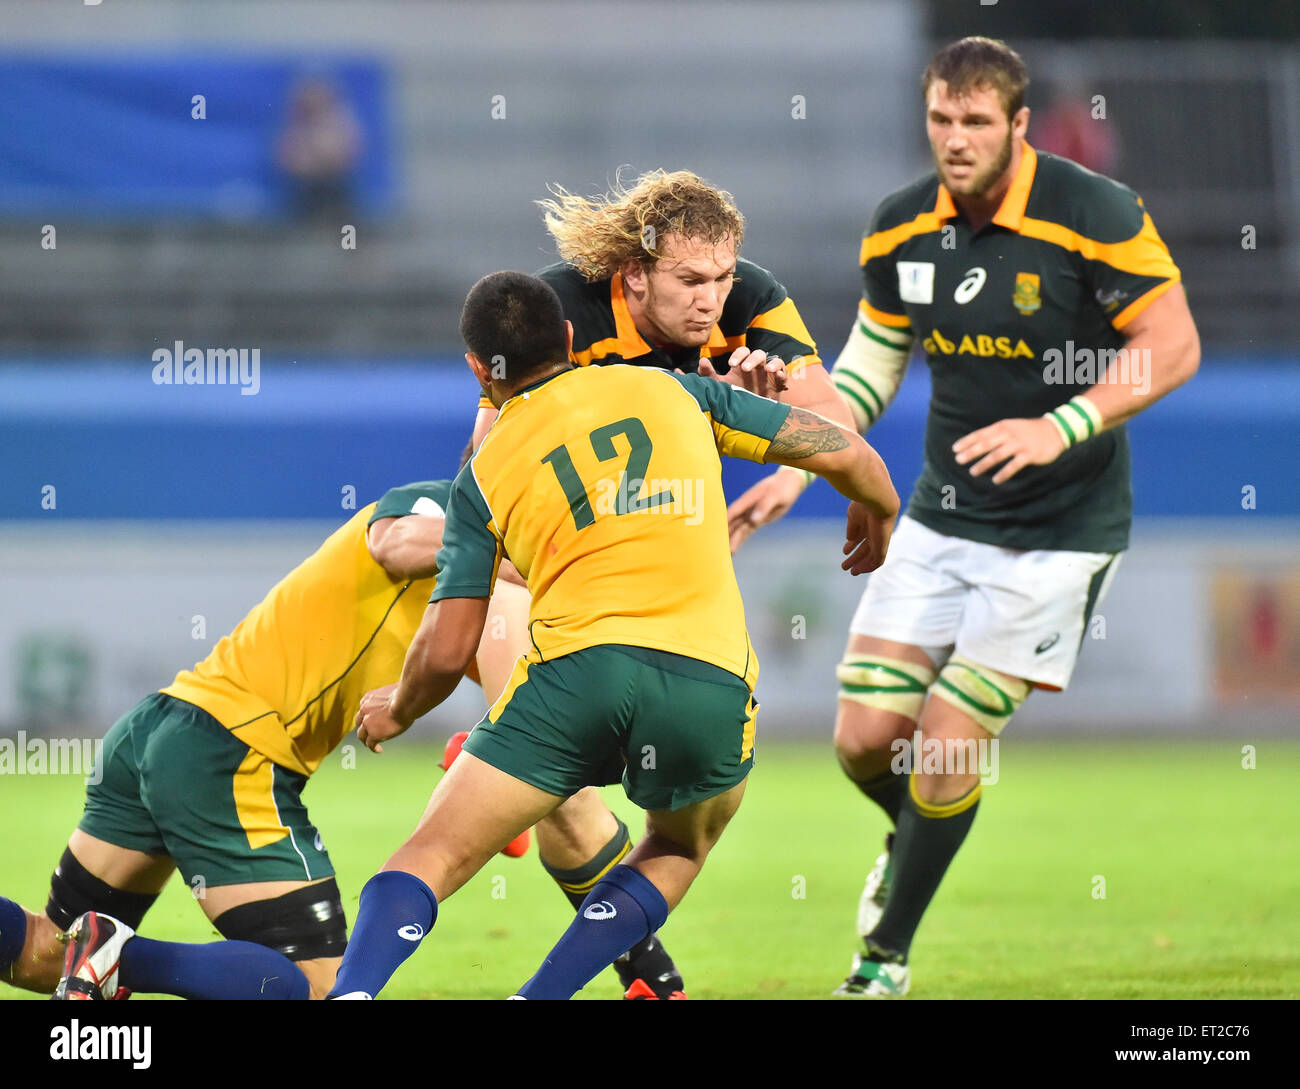 Calvisano, Italy. 10th June, 2015. RG Snyman of South Africa during the 2015 World Rugby U20 Championship match between South Africa and Australia at Stadio San Michele on June 10, 2015 in Calvisano, Italy. Credit:  Roger Sedres/Alamy Live News Stock Photo